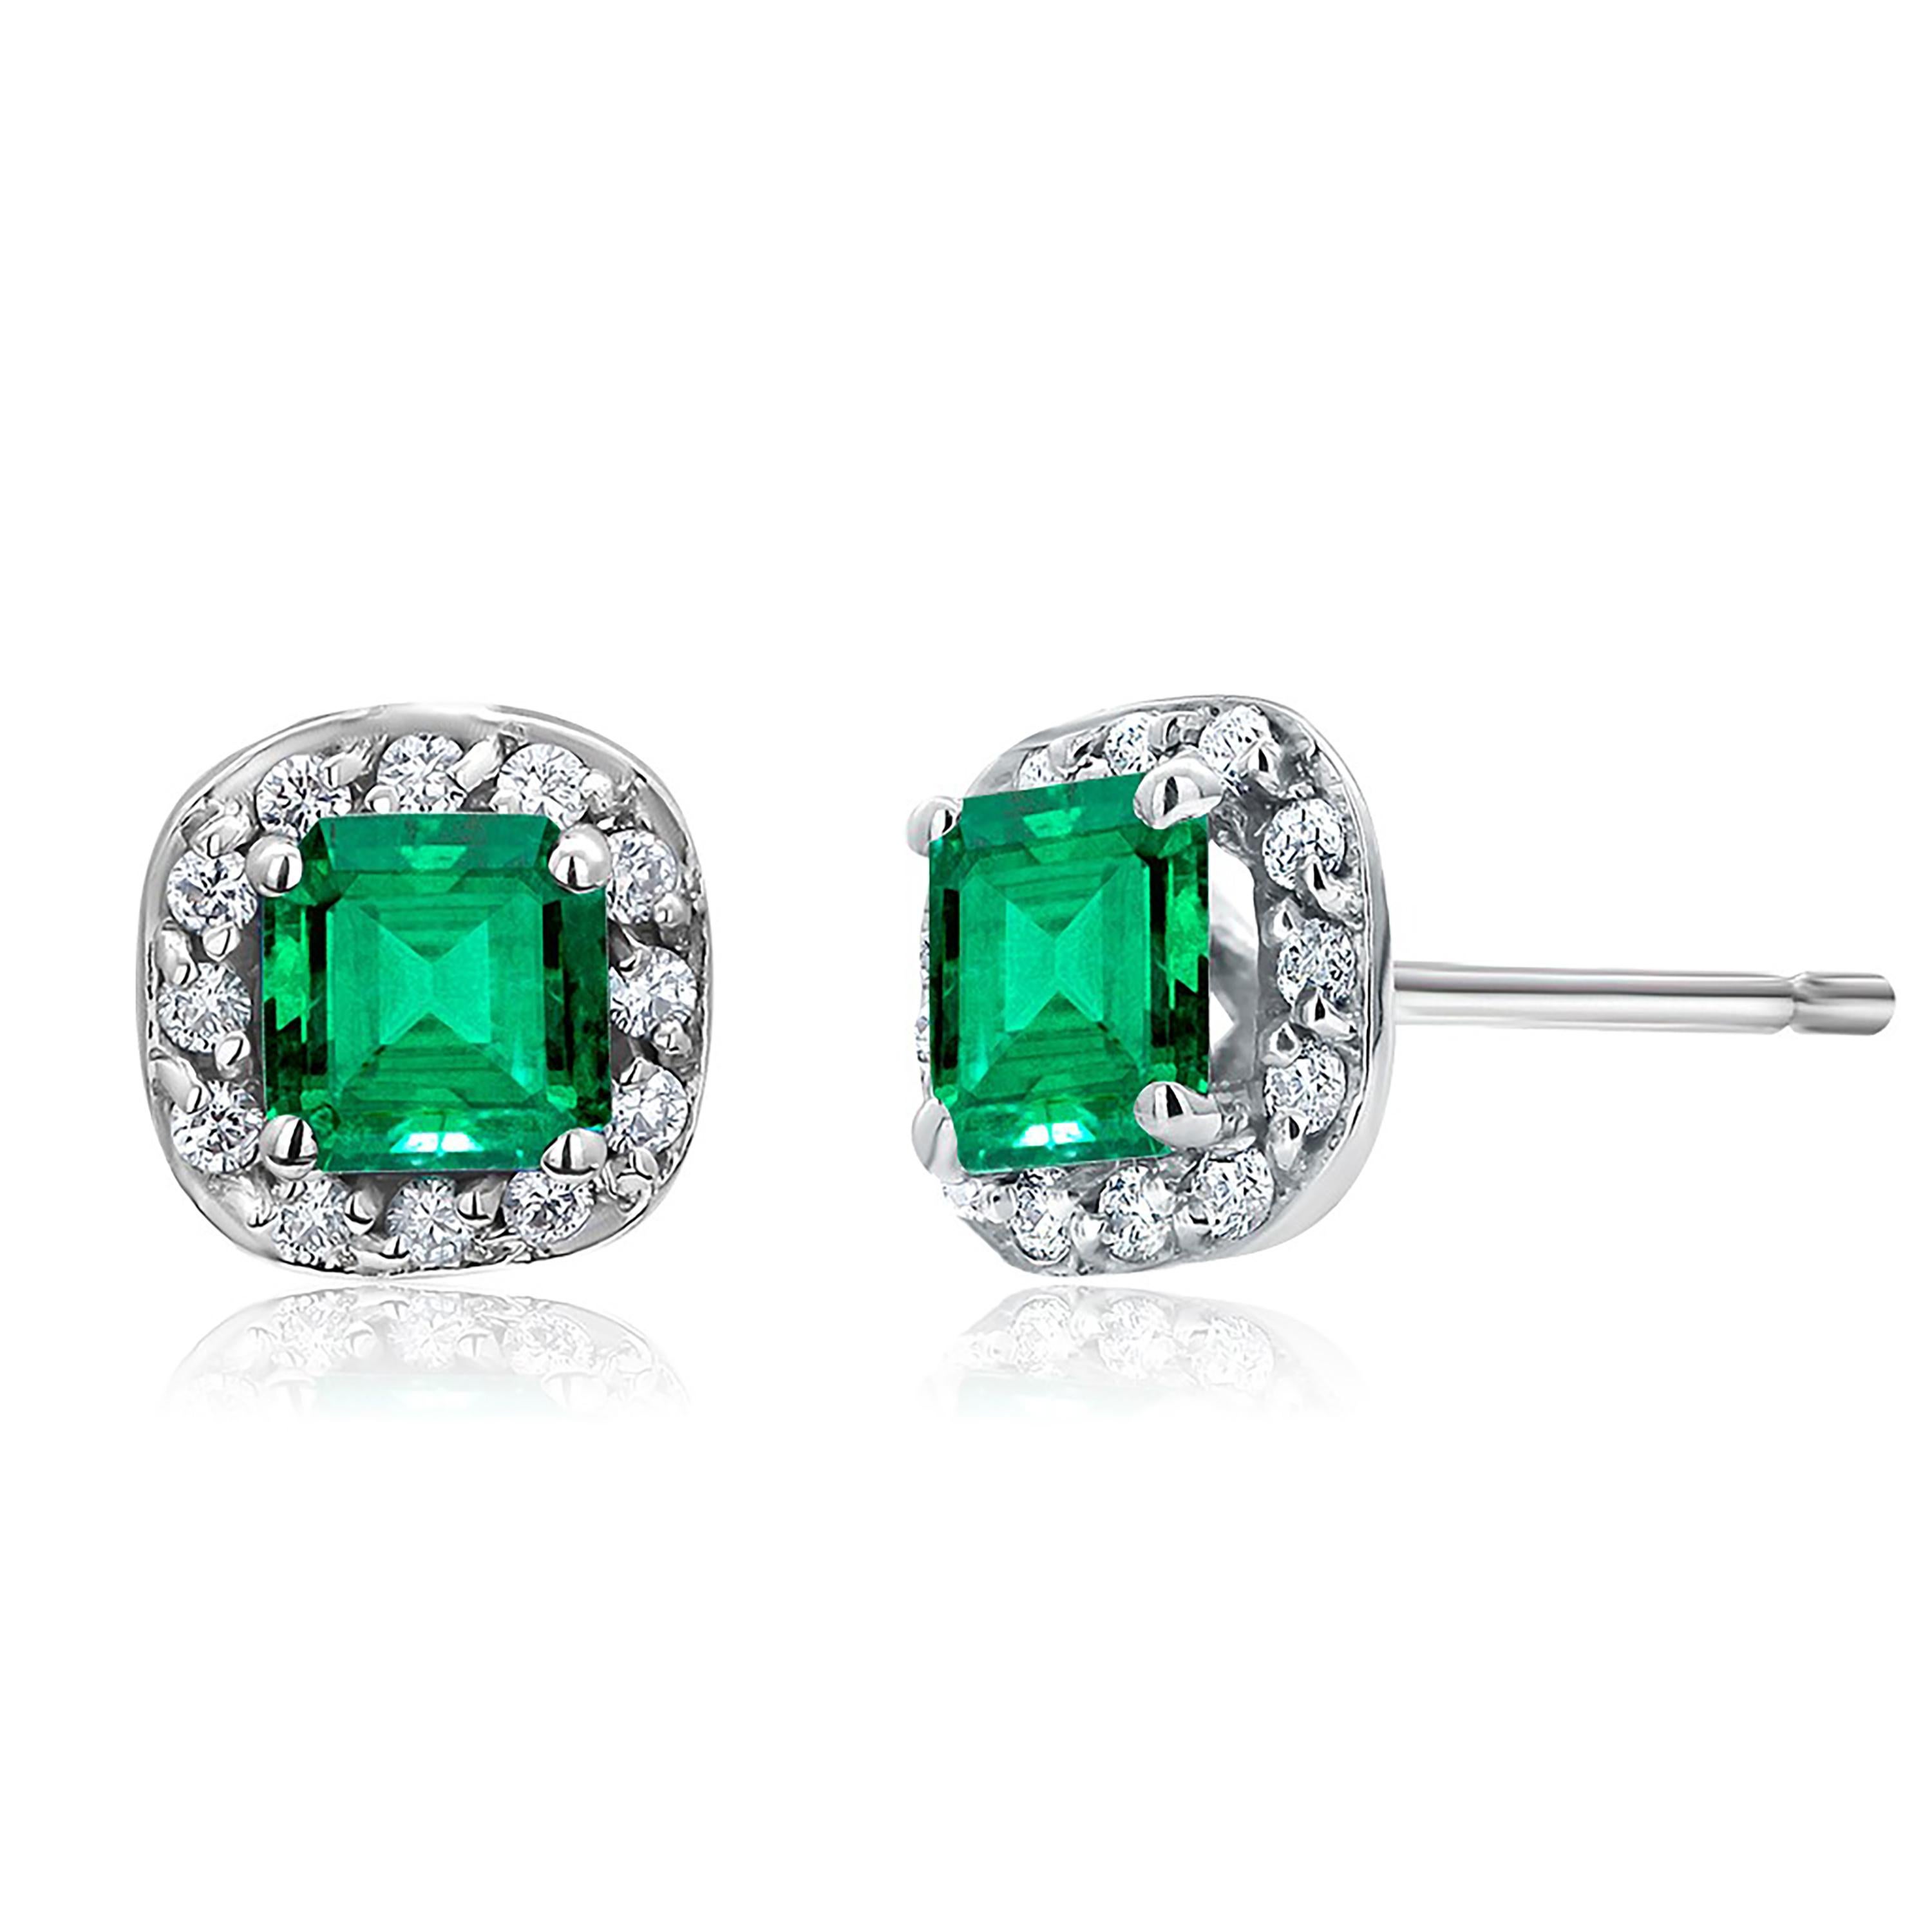 Women's or Men's Emerald and Diamond White Gold Square Shaped Stud Earrings